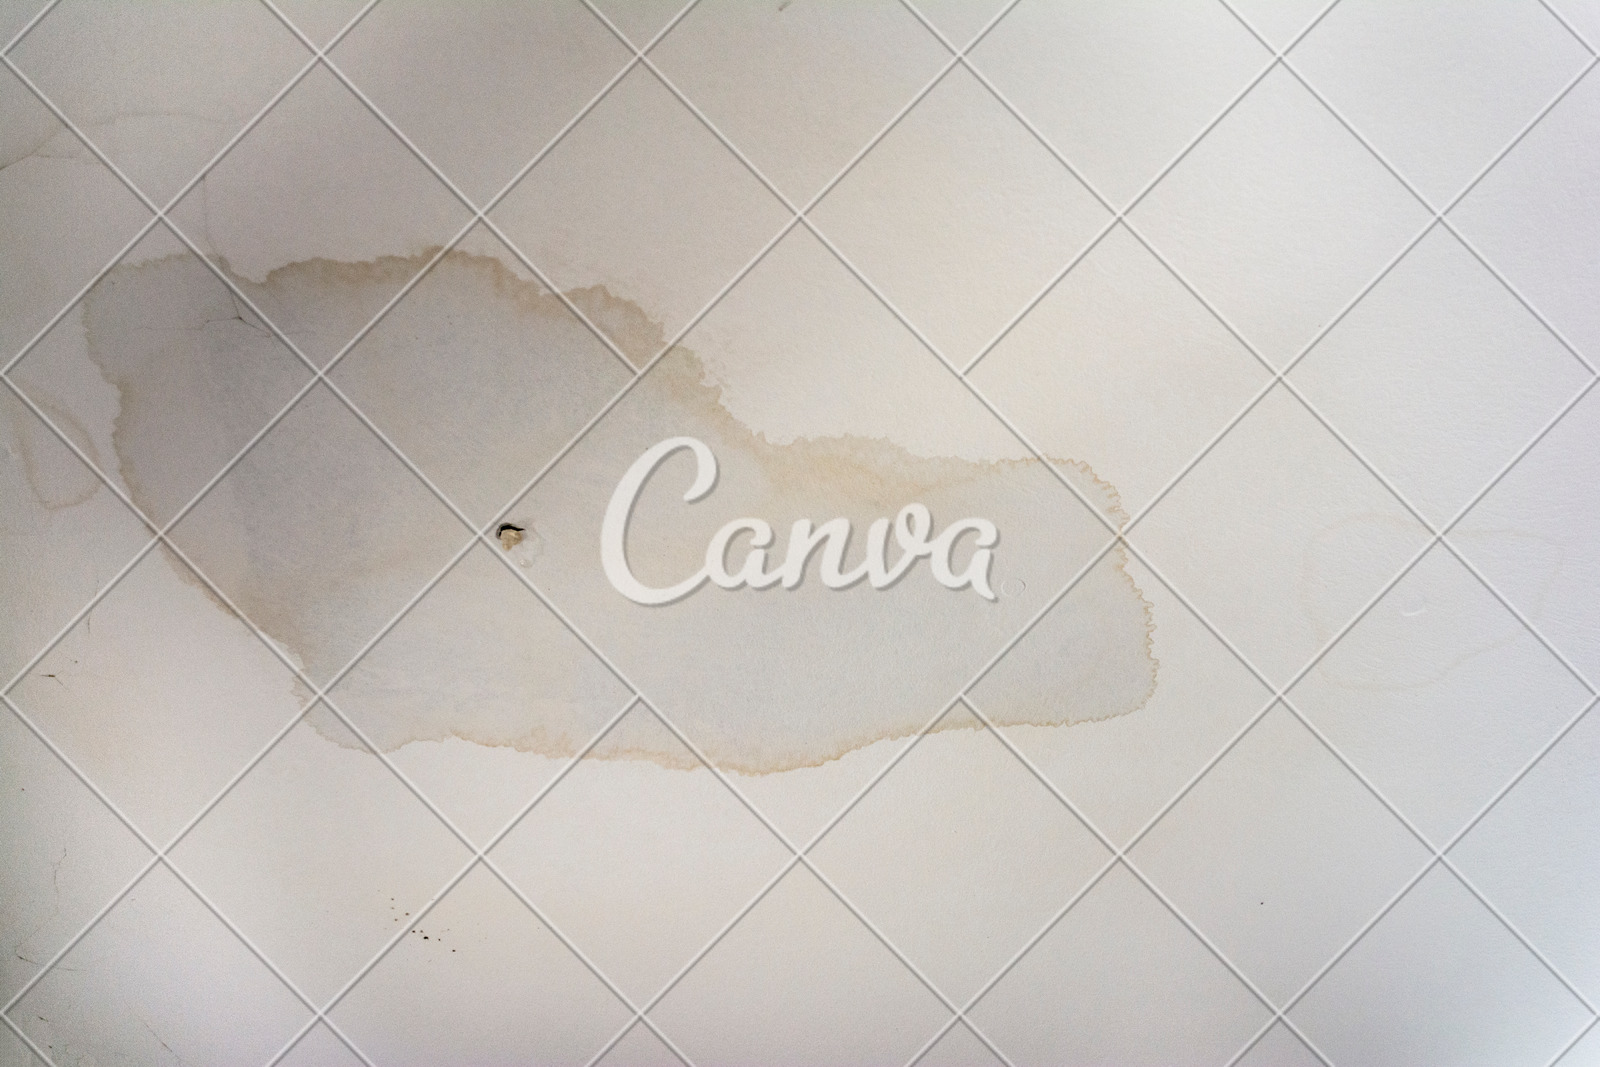 Interior Water Spots On Ceiling Mold Disrepair Damage Tiles